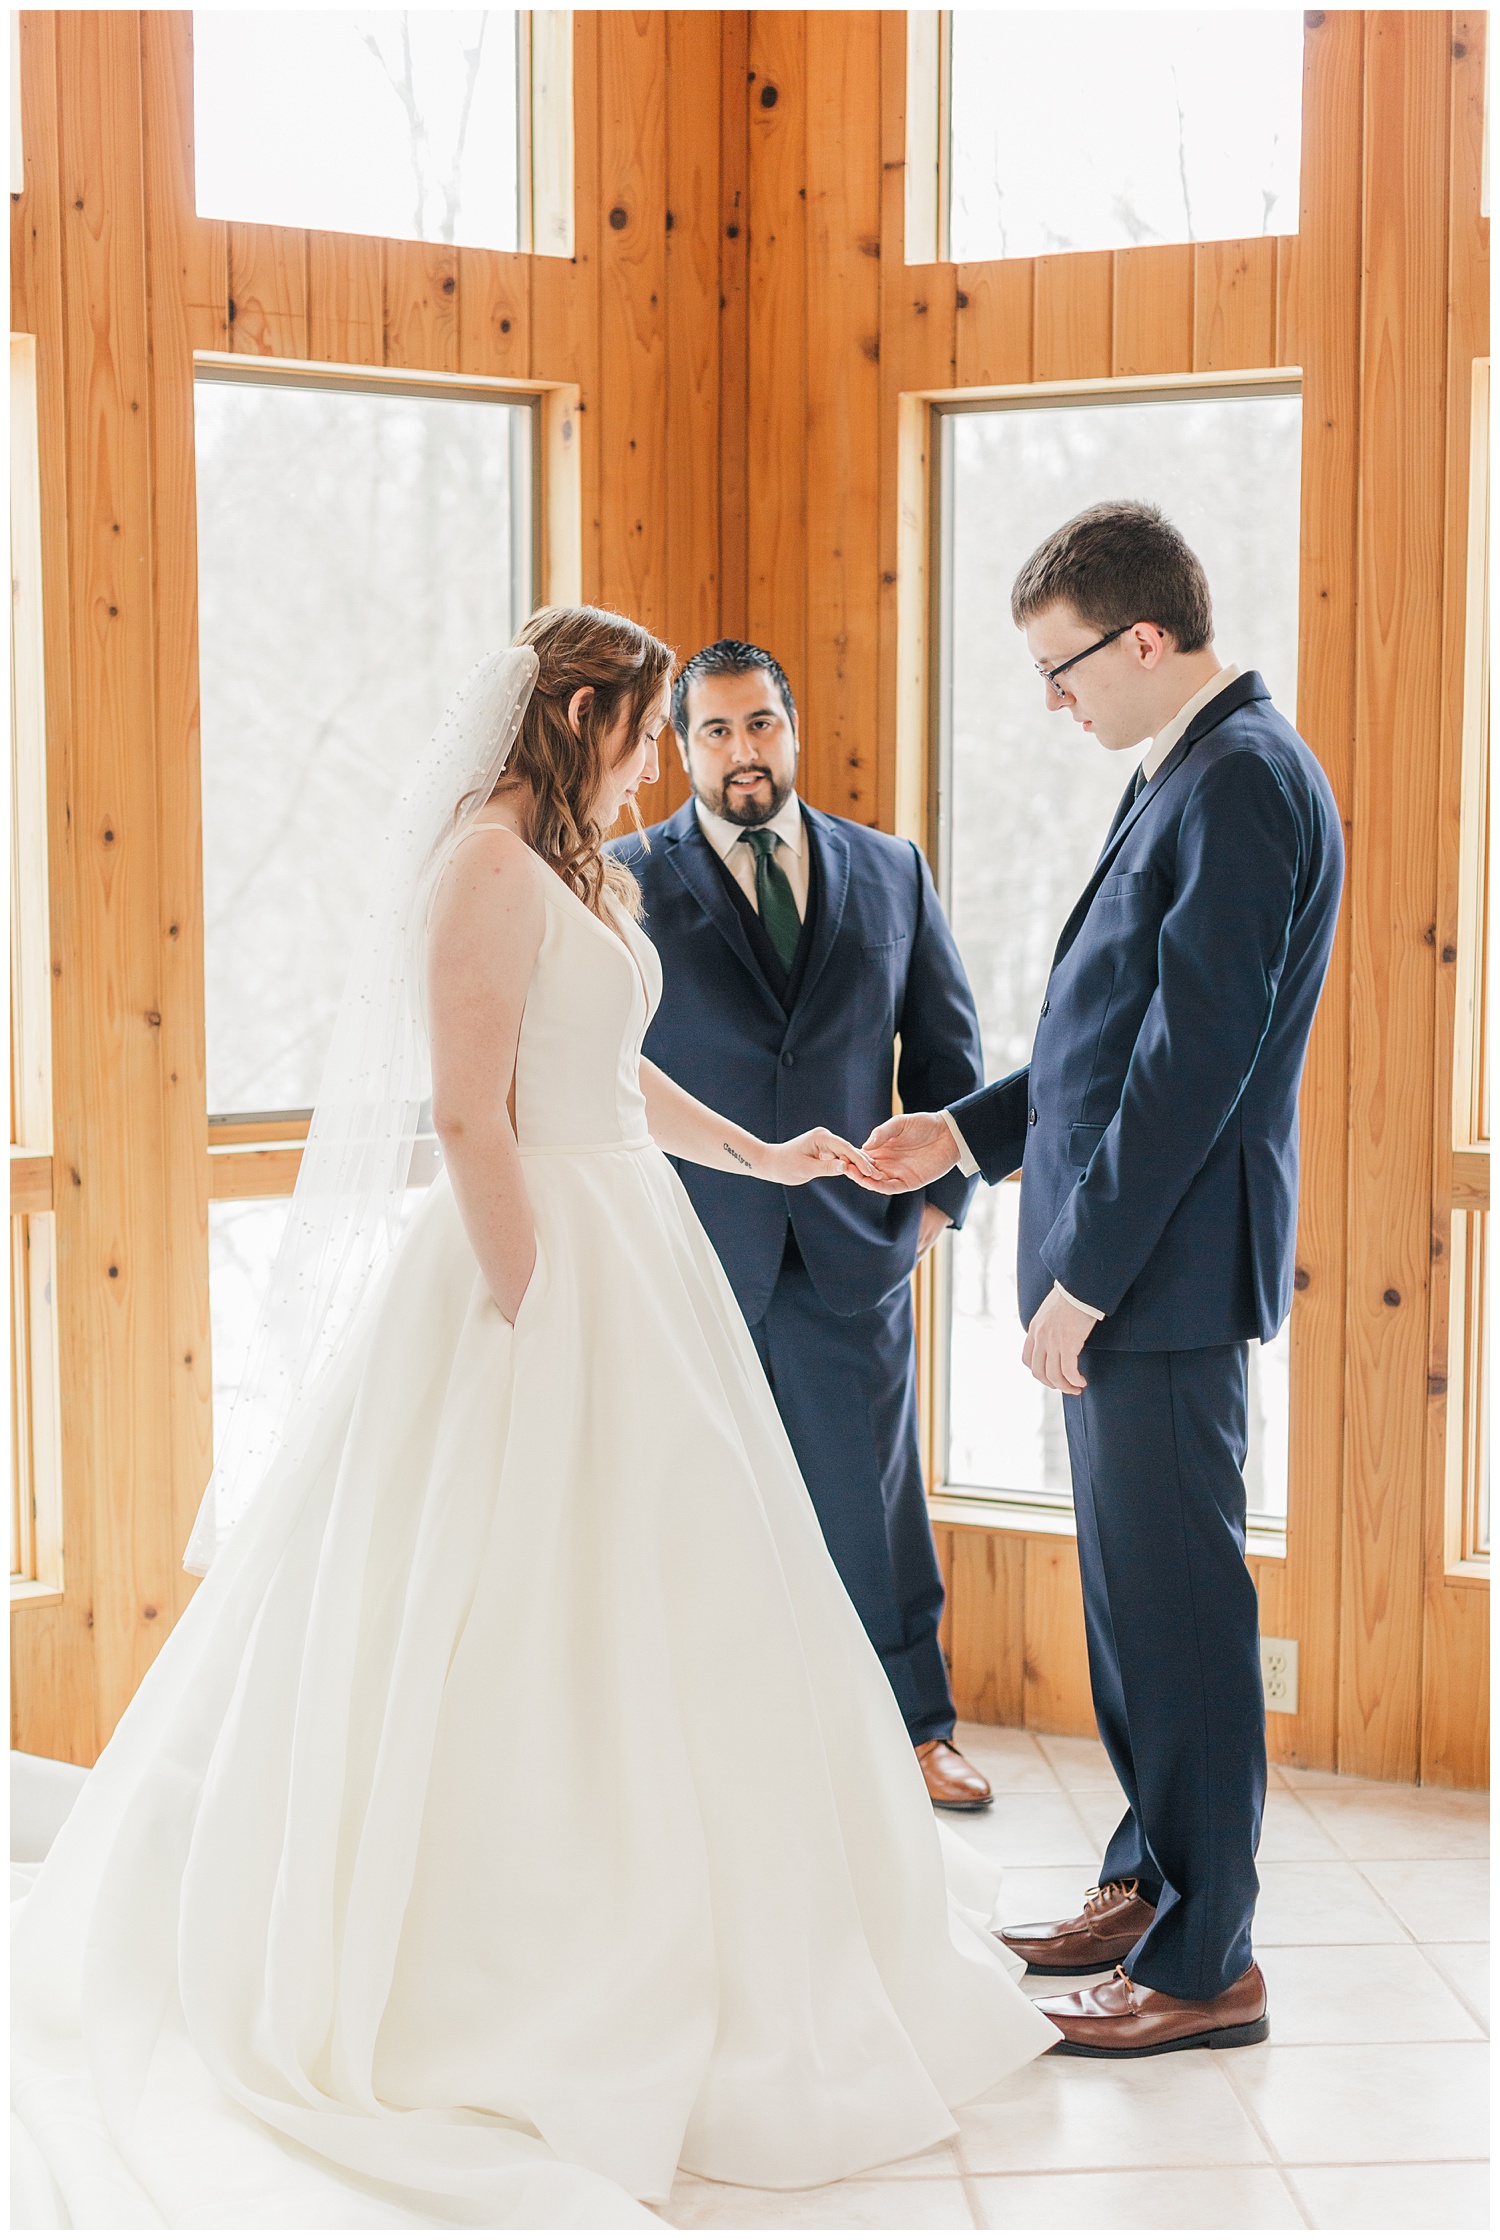 Raven and Tyler are wedded in their family's sunroom on an Iowa winter day in January | CB Studio